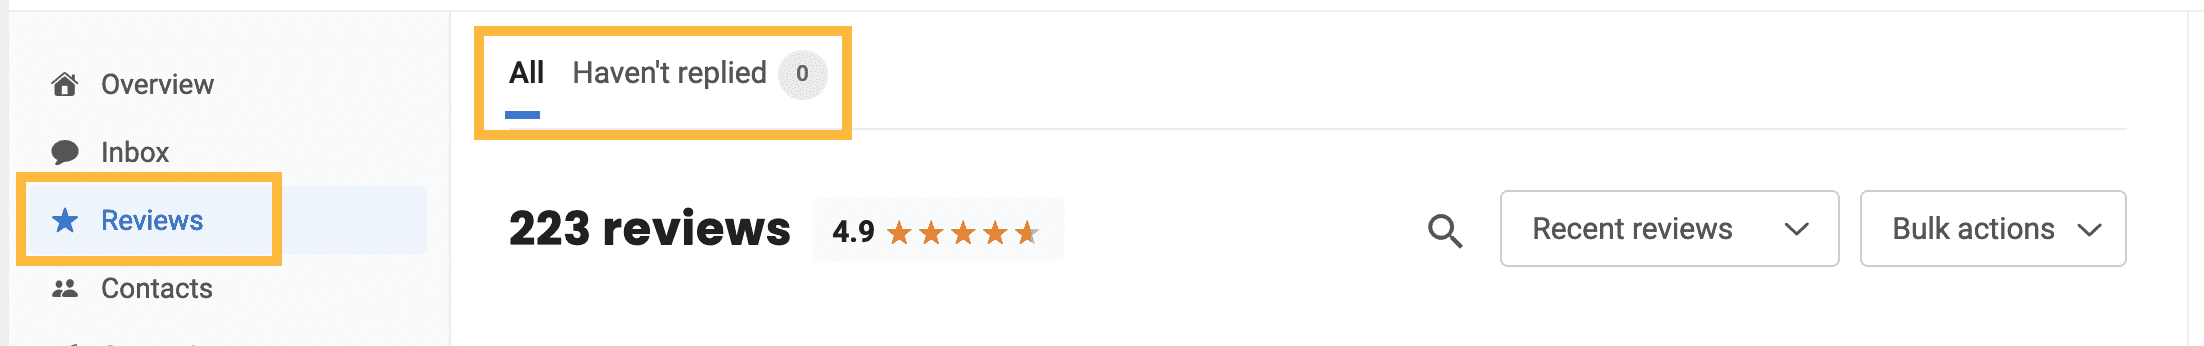 all-reviews